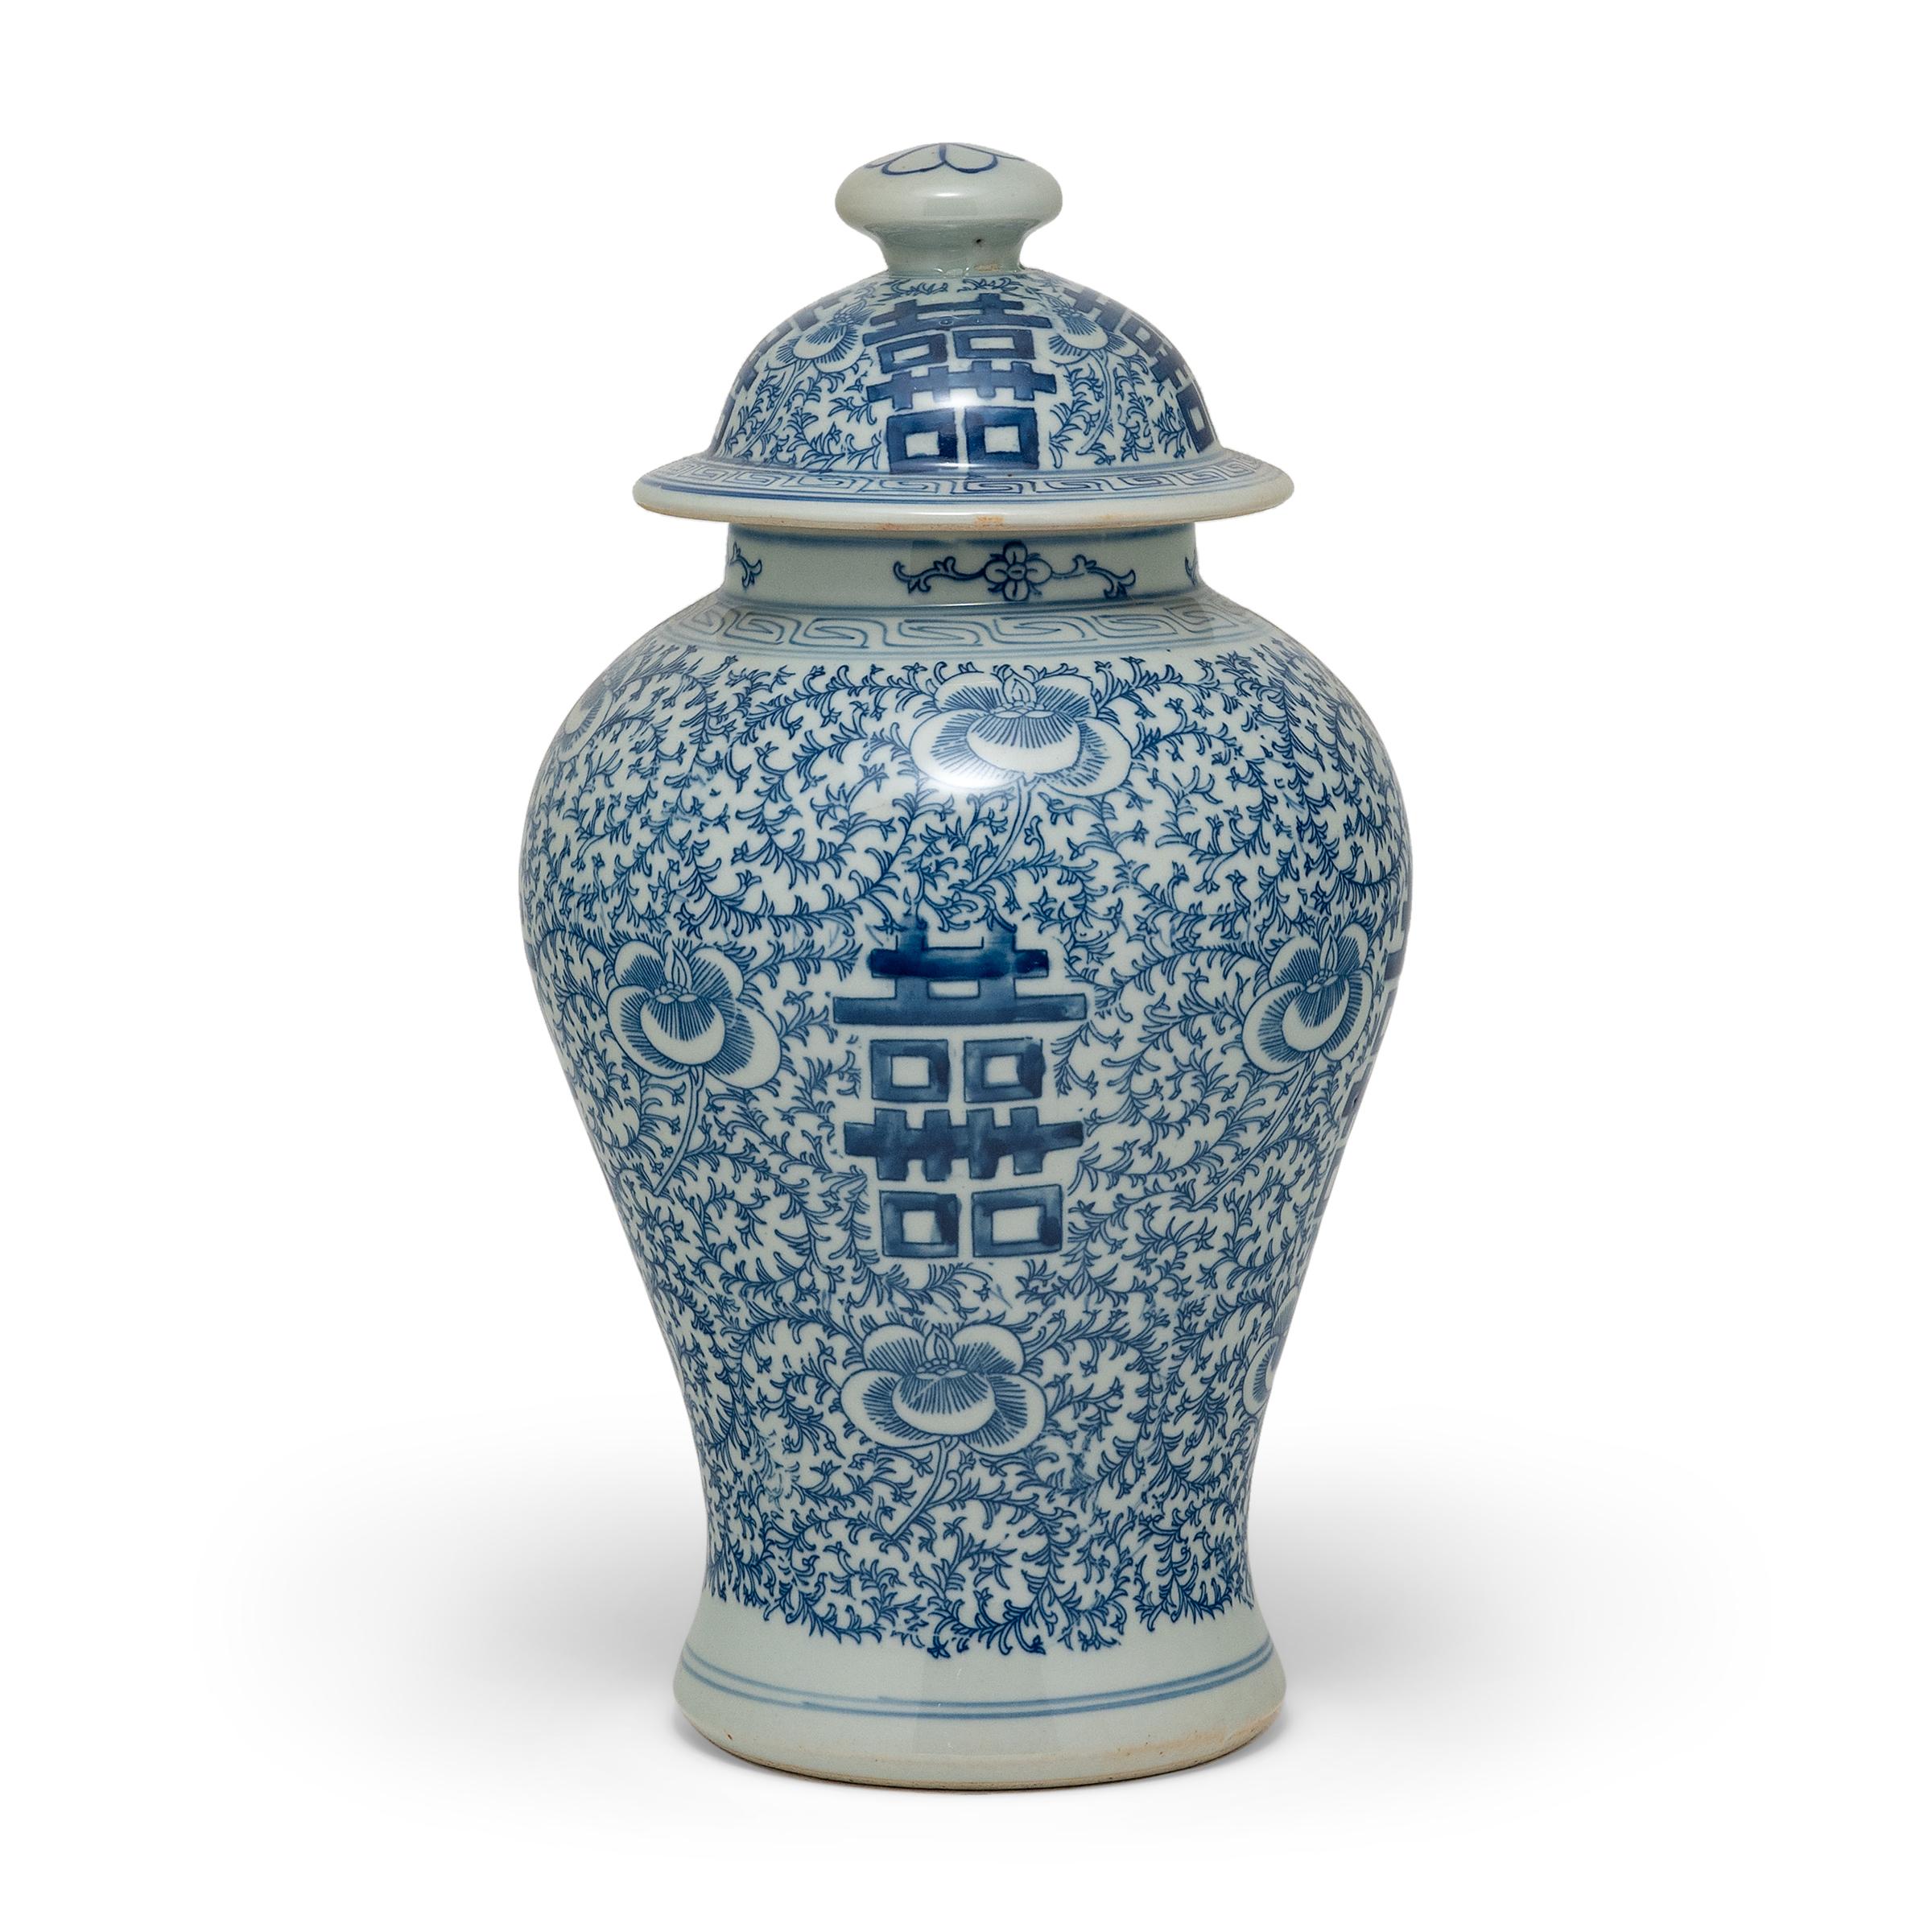 The symbol for double happiness adorns this pair of ginger jars with best wishes for love, companionship and marital bliss. Glazed in the classic blue and white manner, each porcelain jar has a classic curved form with rounded shoulders that taper